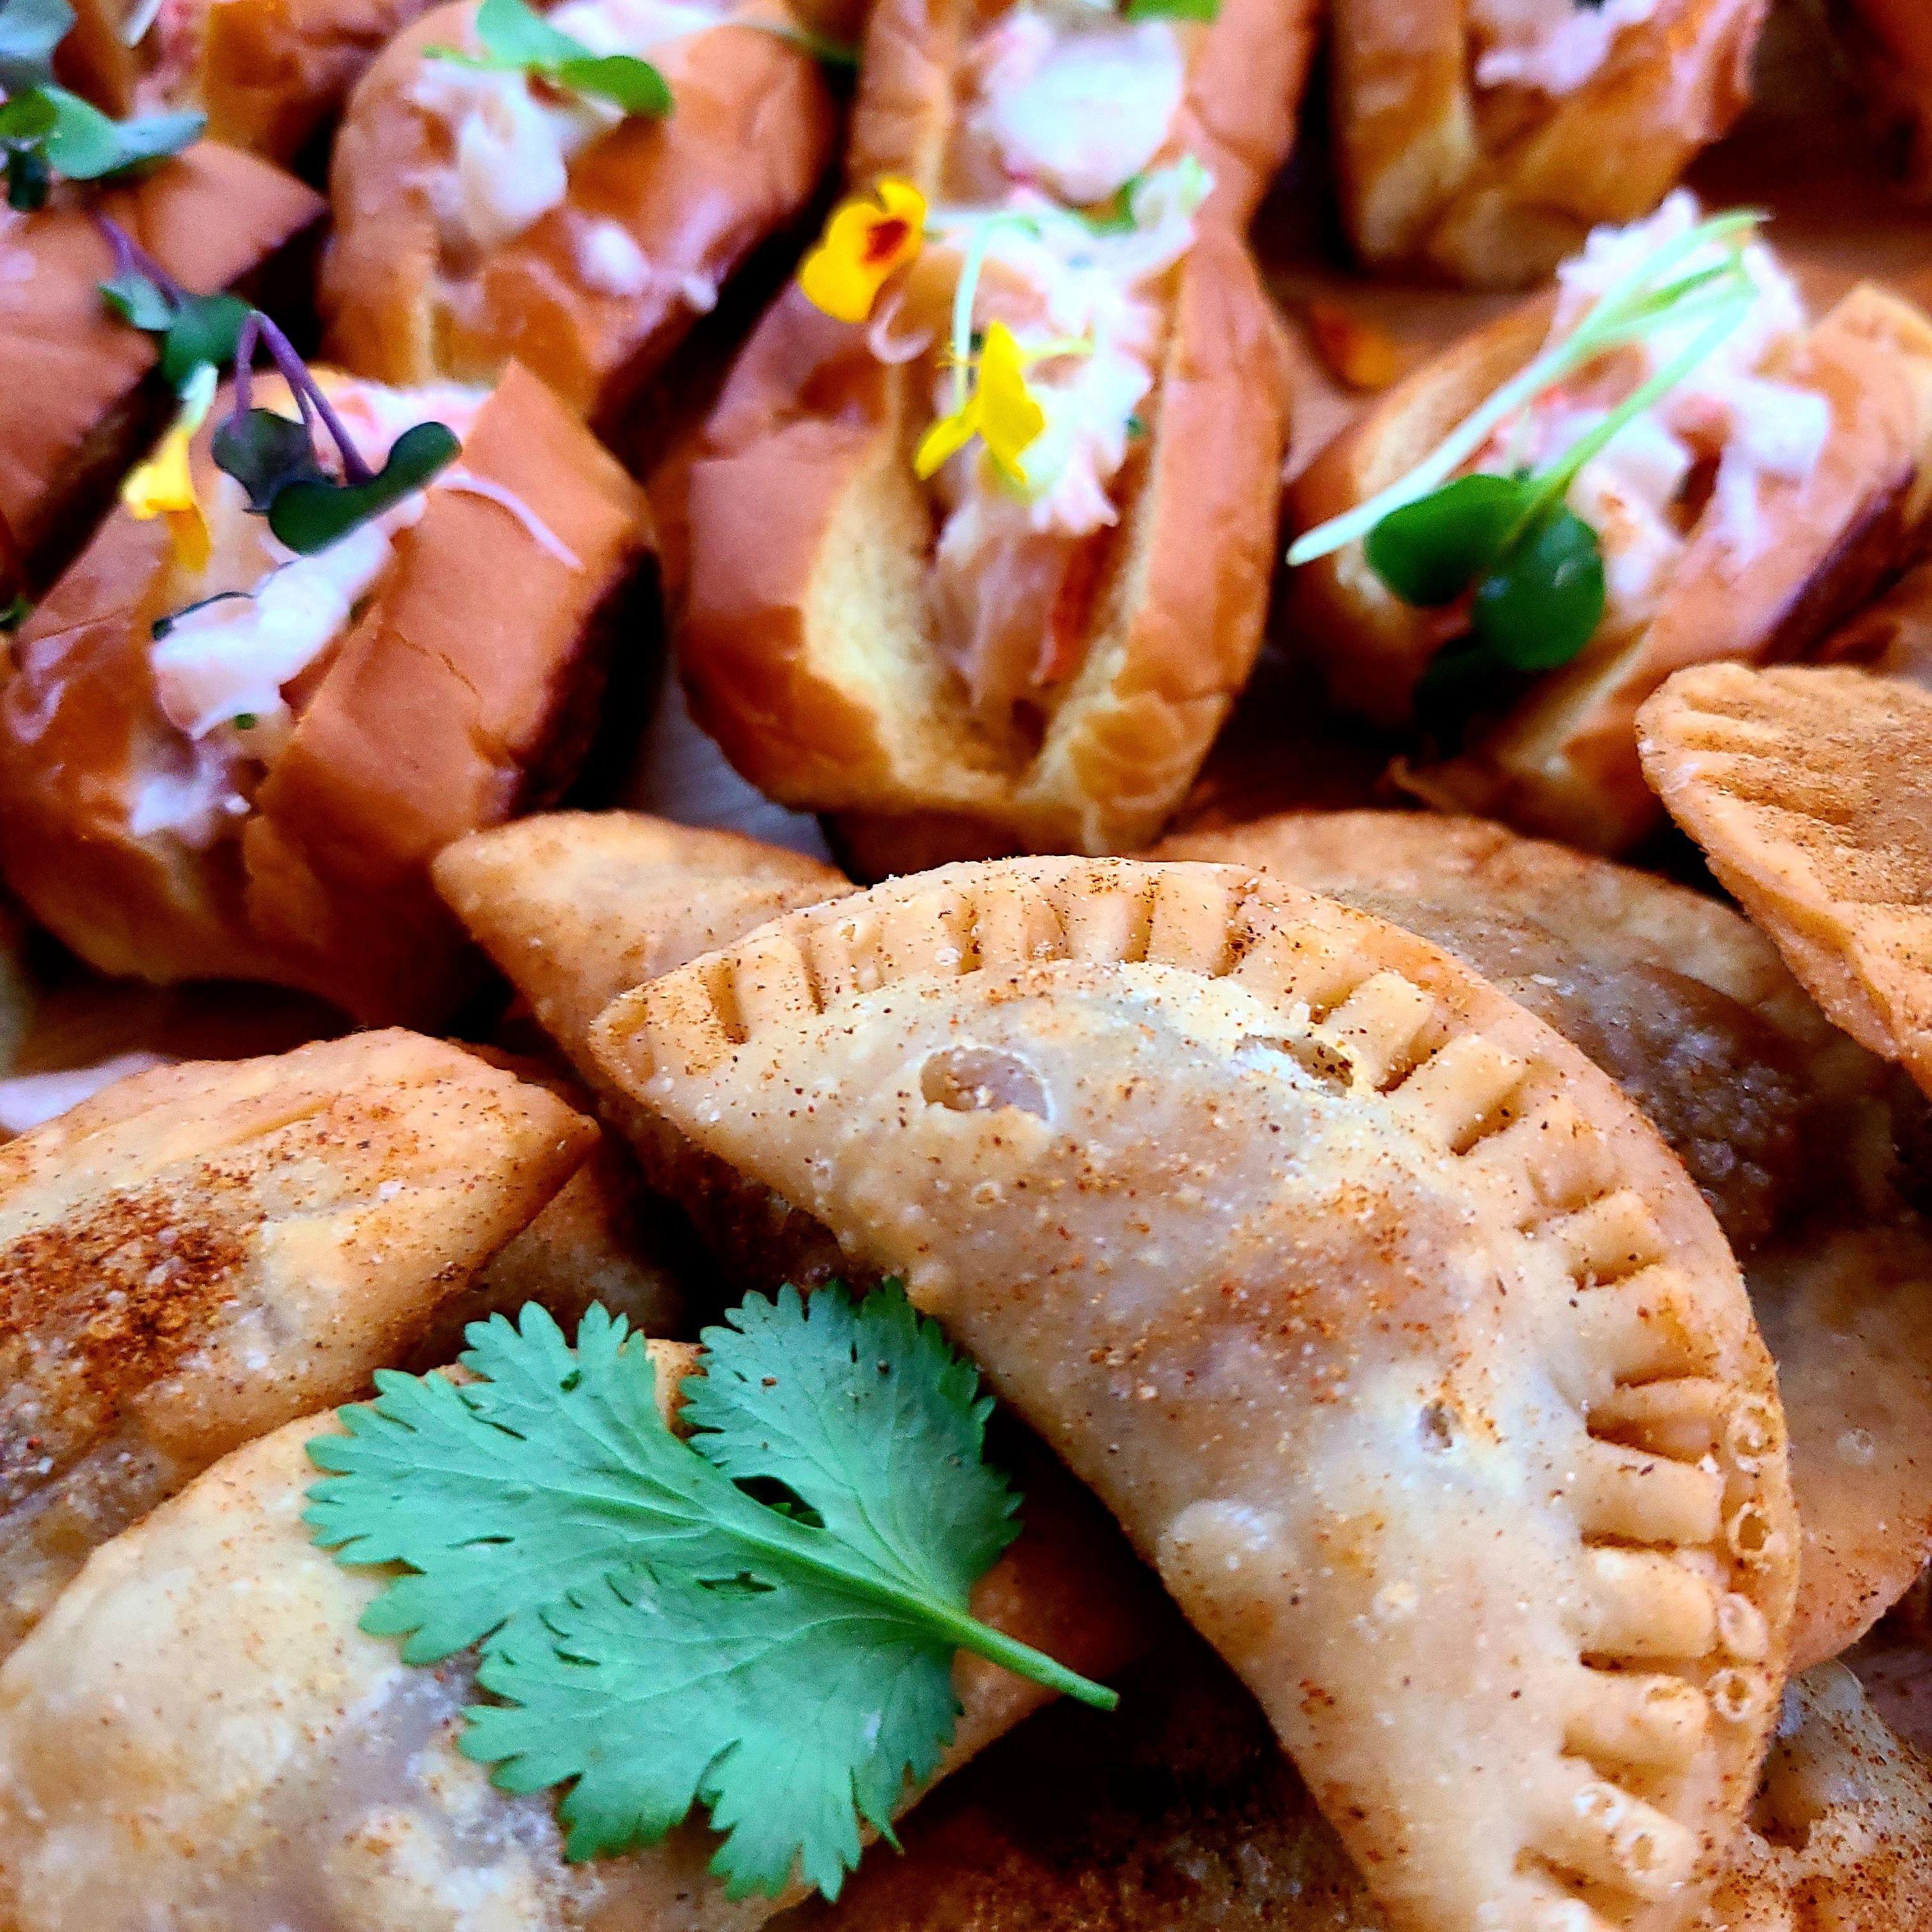 Flagler Tavern offers private event space with a full catering menu like these mini beef empanadas or mini lobster rolls